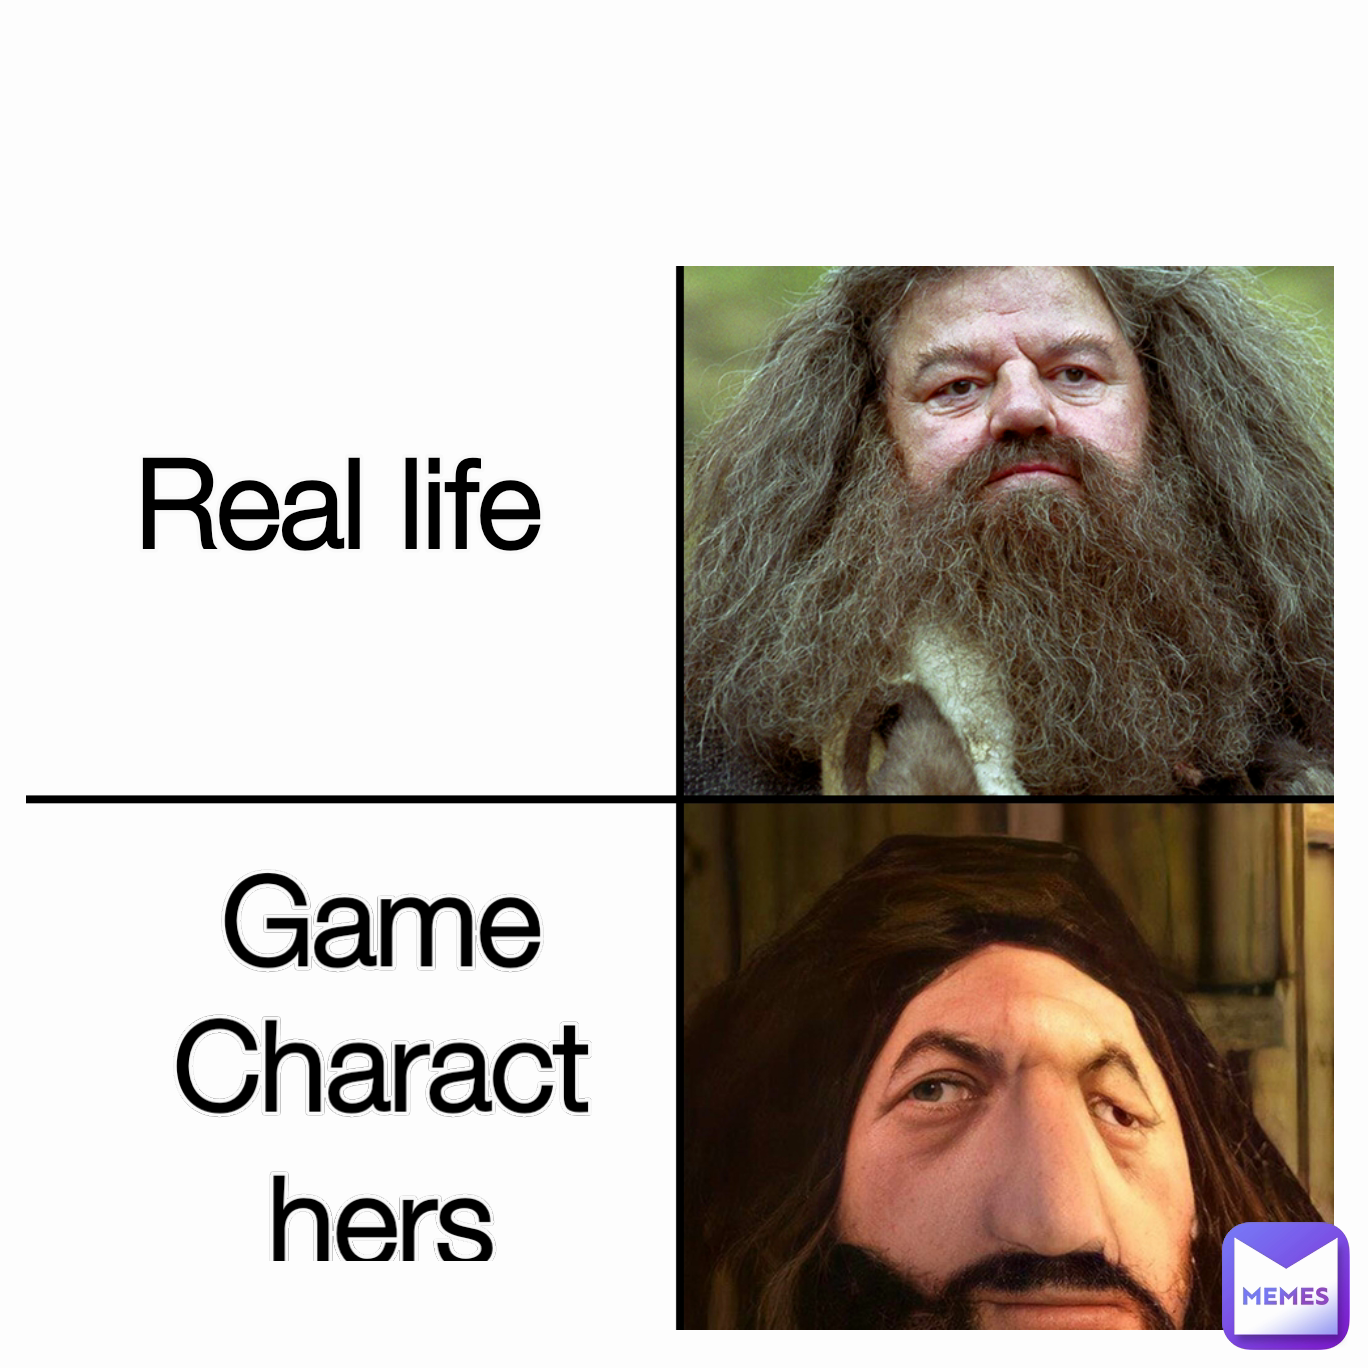 Real life Game Characthers
